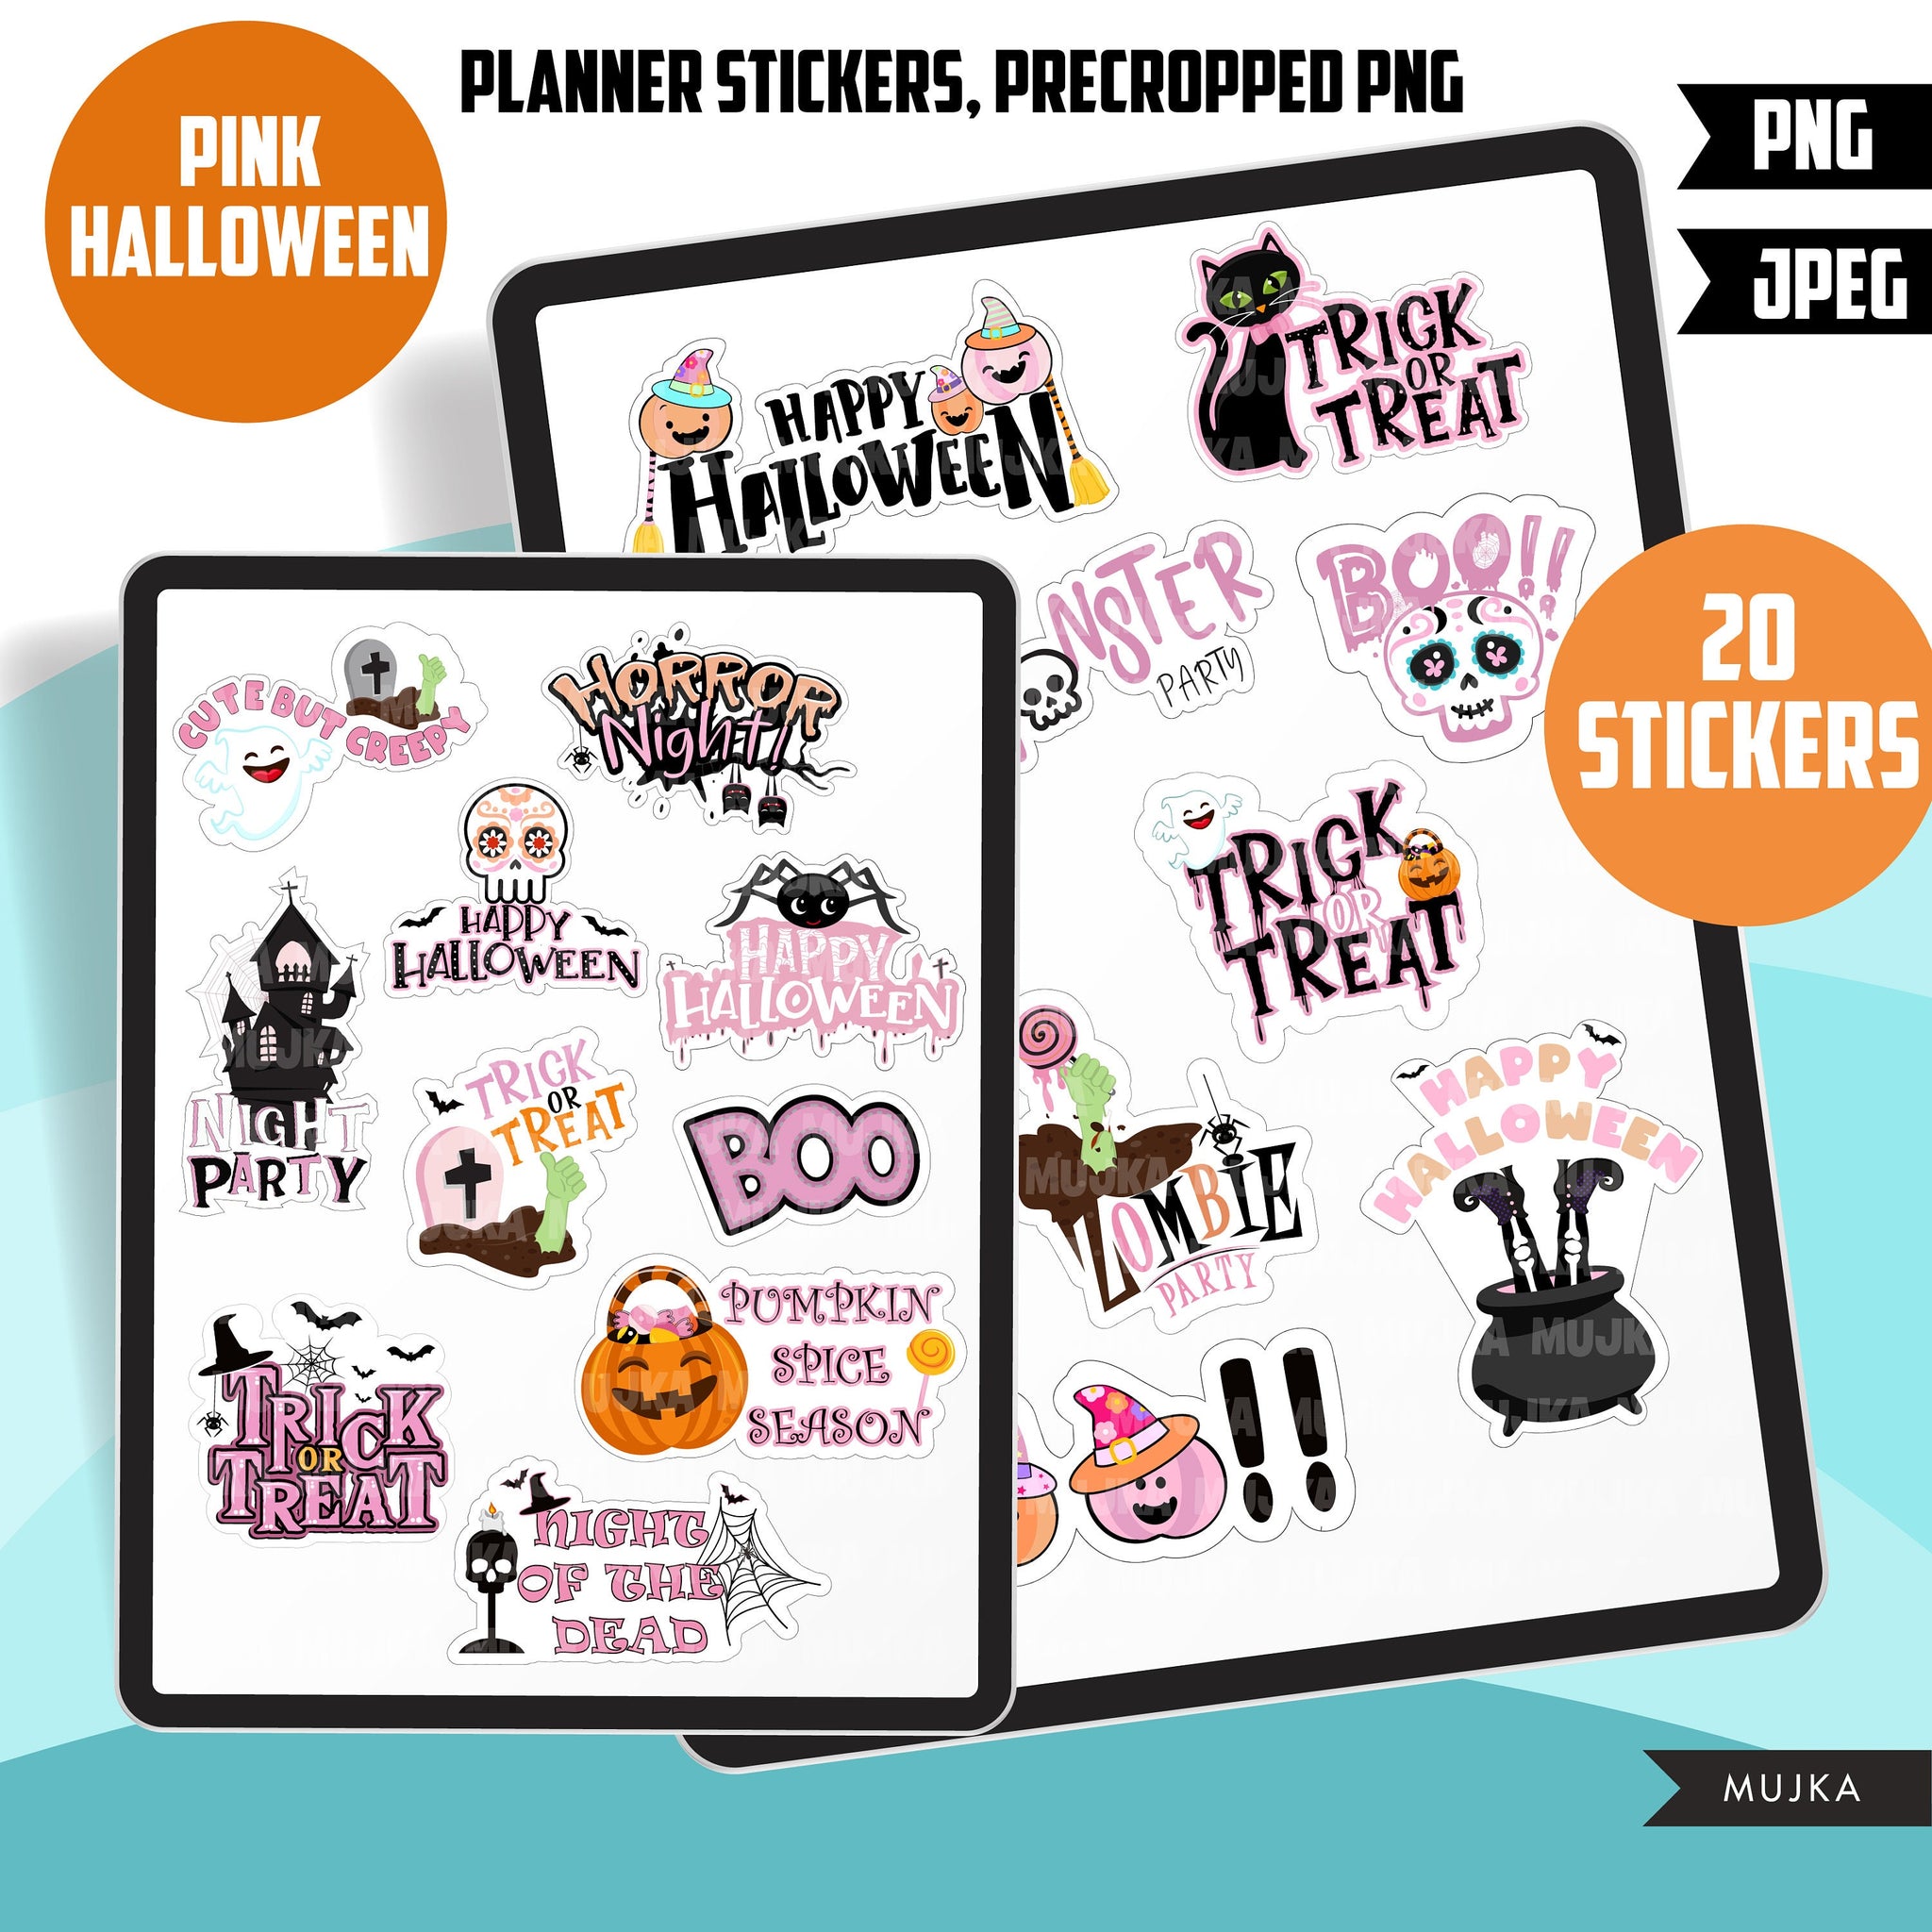 Printable Halloween stickers, precropped png stickers, trick or treat stickers, sugar skull stickers, goodnotes planner stickers, pink png